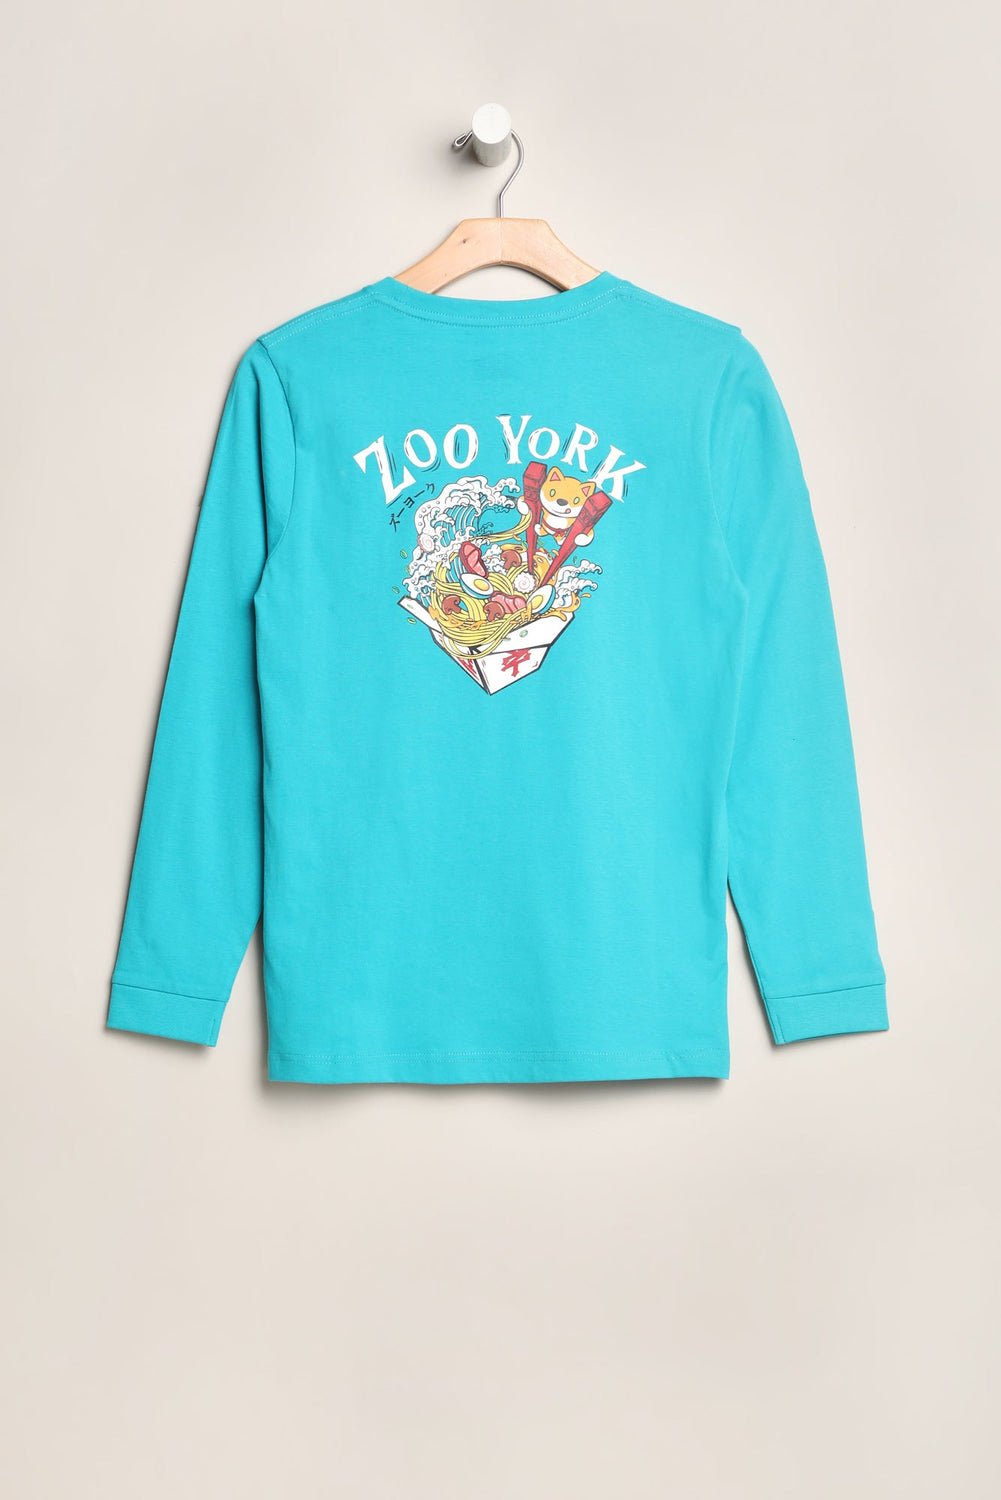 Zoo York Youth Takeout Noodles Long Sleeve Top Zoo York Youth Takeout Noodles Long Sleeve Top